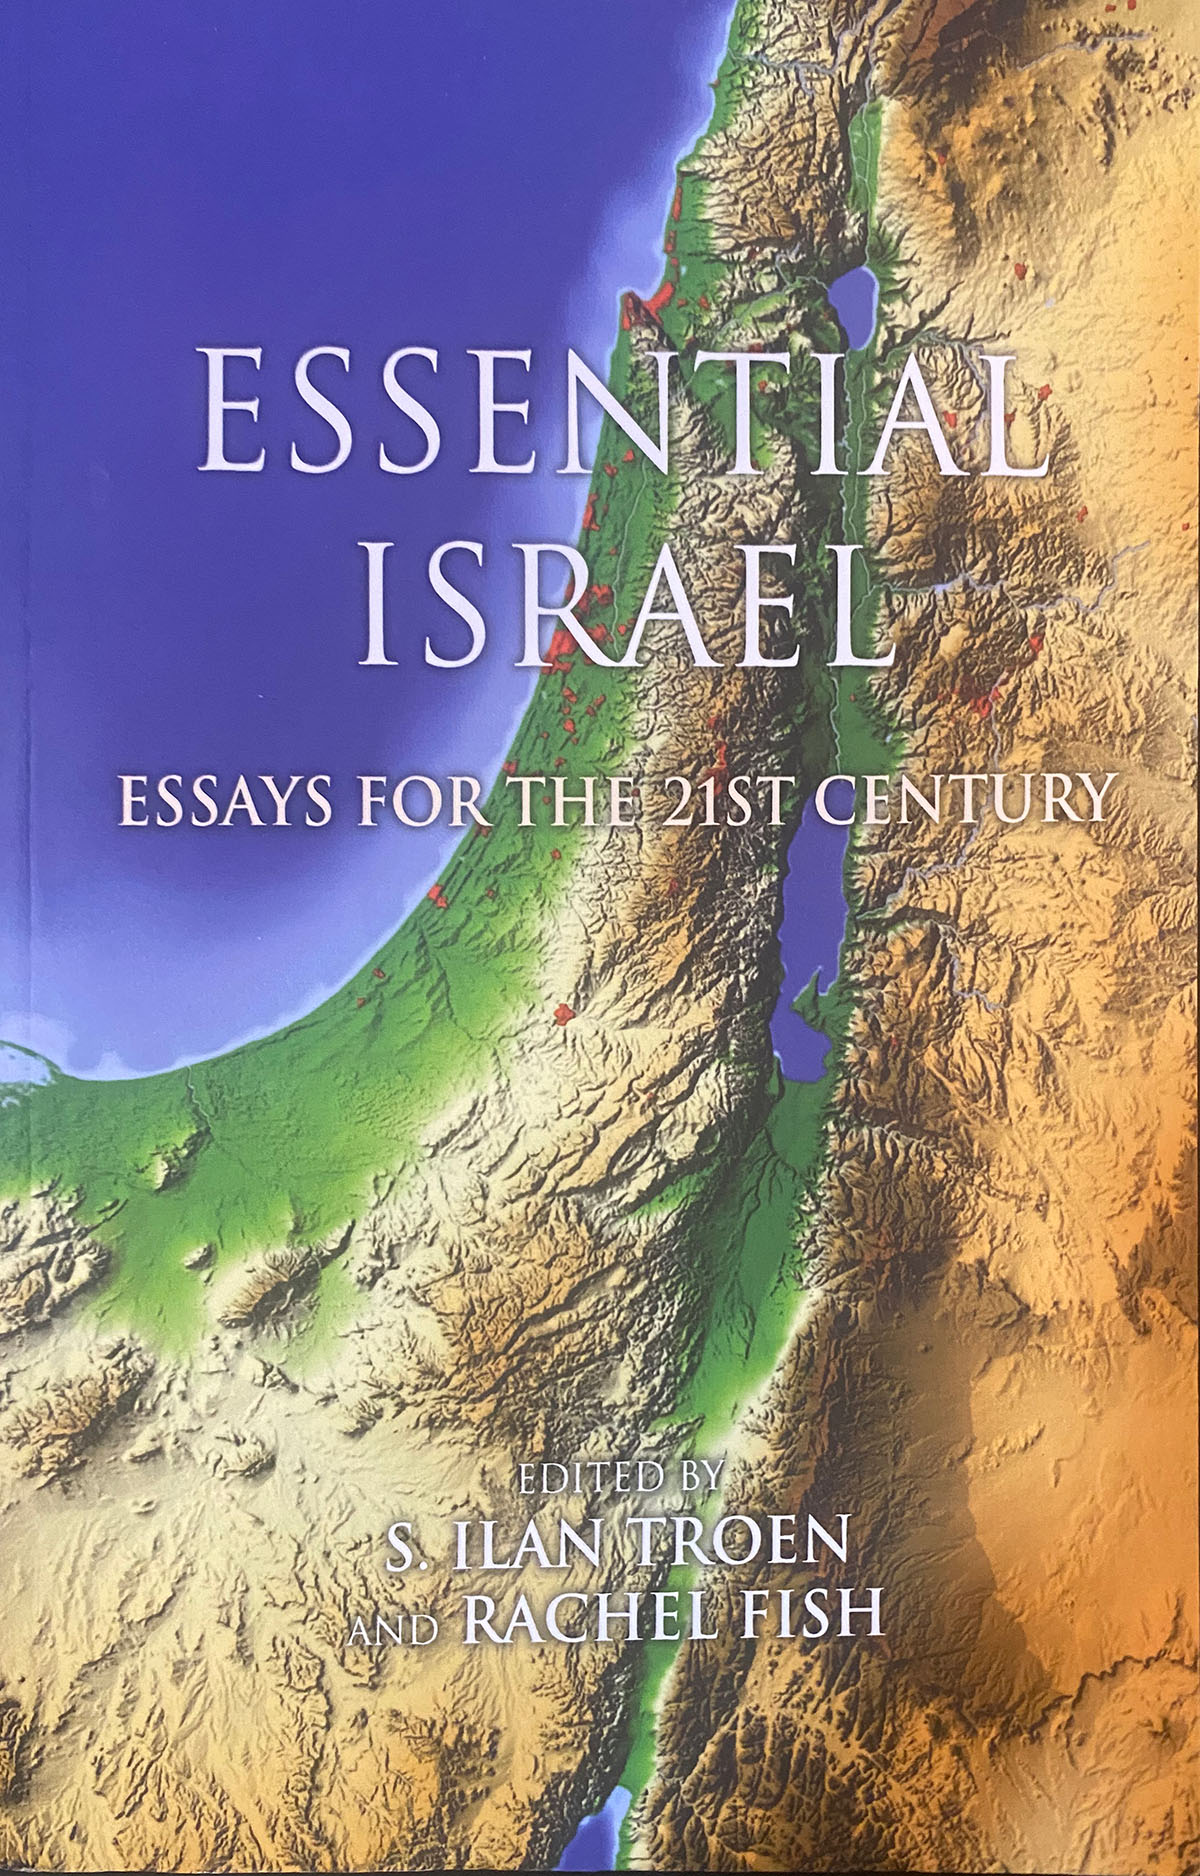 A Glossary of Terms on modern Israel in Essential Israel